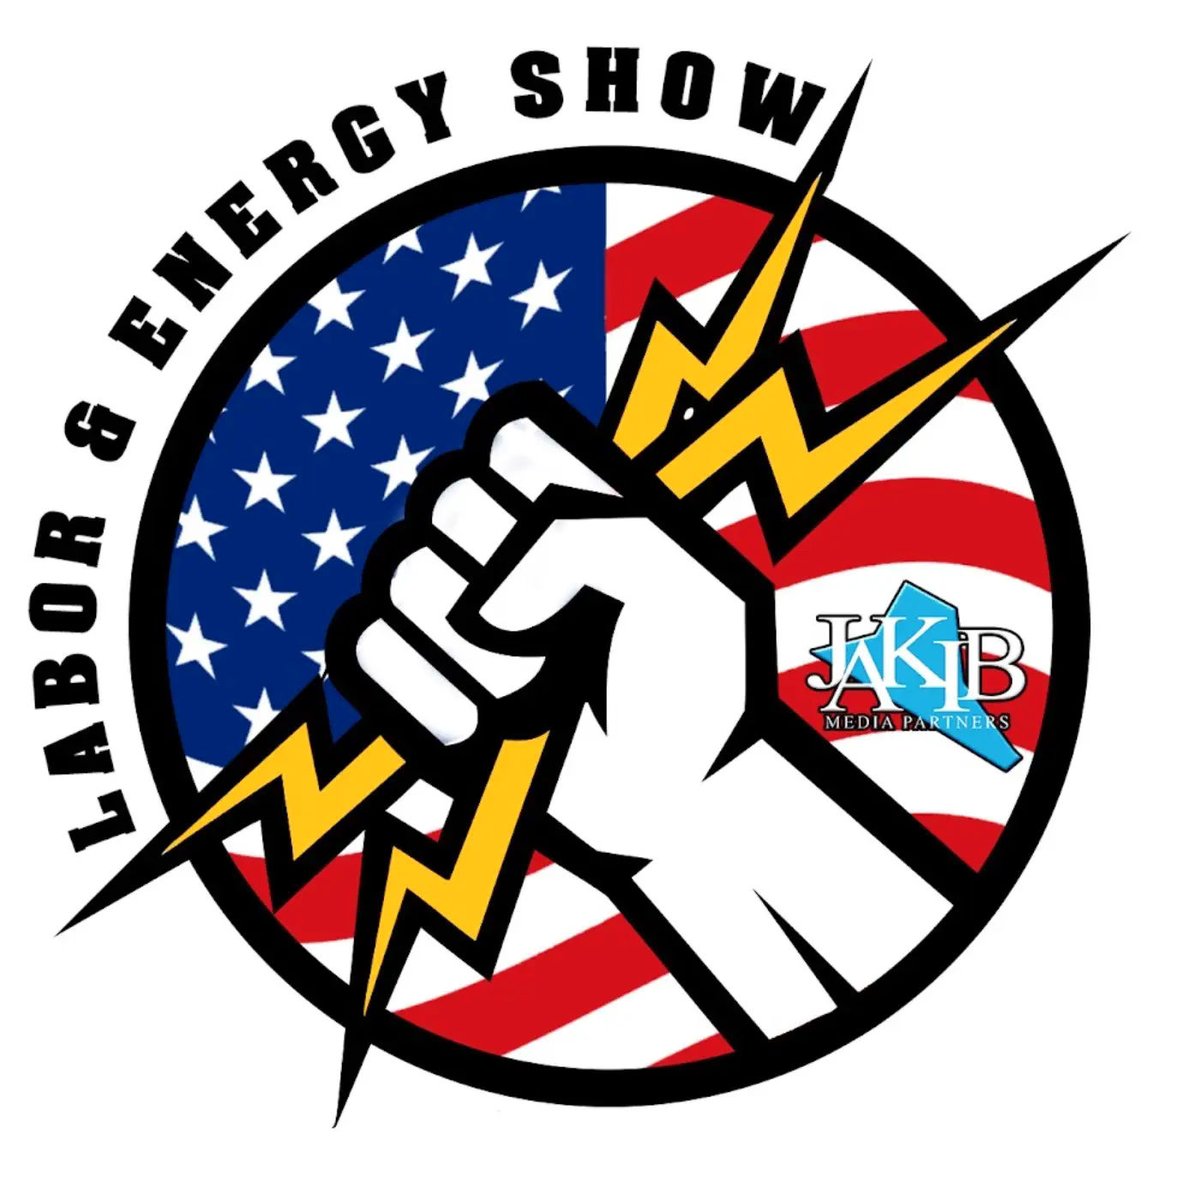 The Labor and Energy Show goes live on @Delaware1059 at 7:00 AM Eastern! Listen Live at player.listenlive.co/44351 Looking for more podcasts & radio shows that speak to working people about working people's issues? Visit laborradionetwork.org #1u #UnionStrong #LaborRadioPod